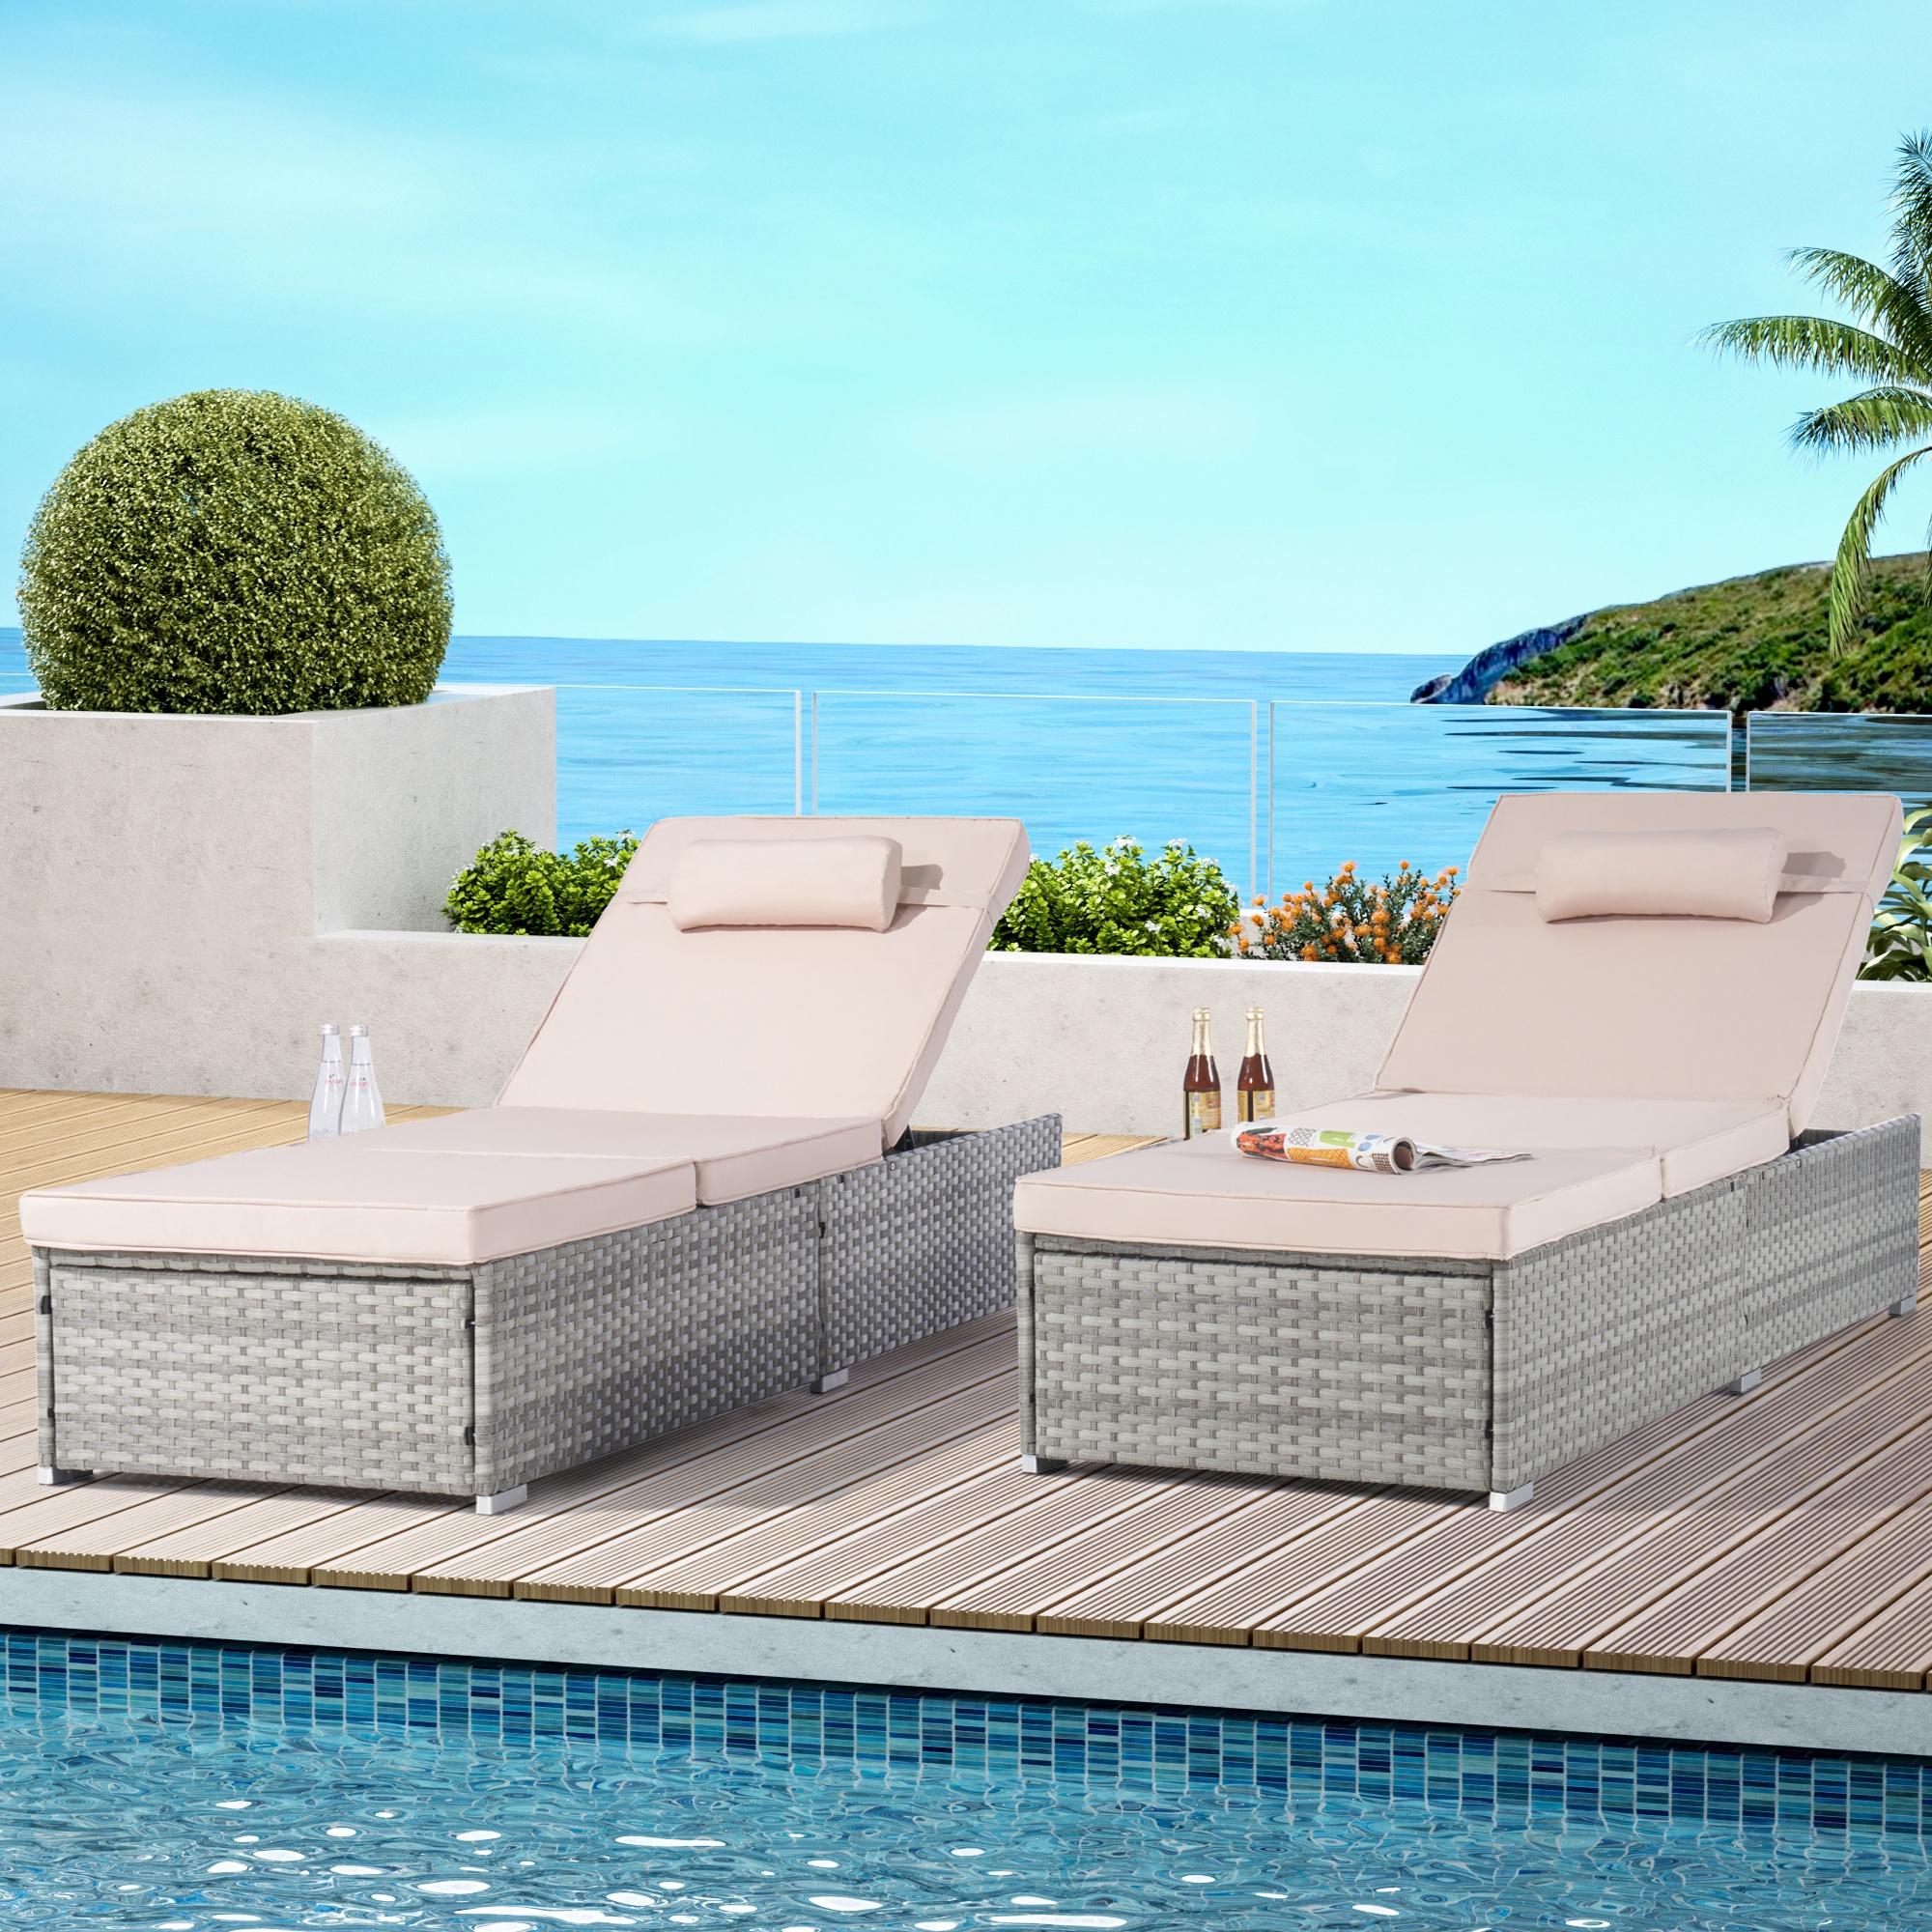 Patio Chaise Lounge Set of 2, Outdoor Lounge Chairs with 5 Backrest Angles, Chaise Lounge Chairs, Patio Reclining Chair Furniture for Poolside, Deck, Backyard - image 2 of 10